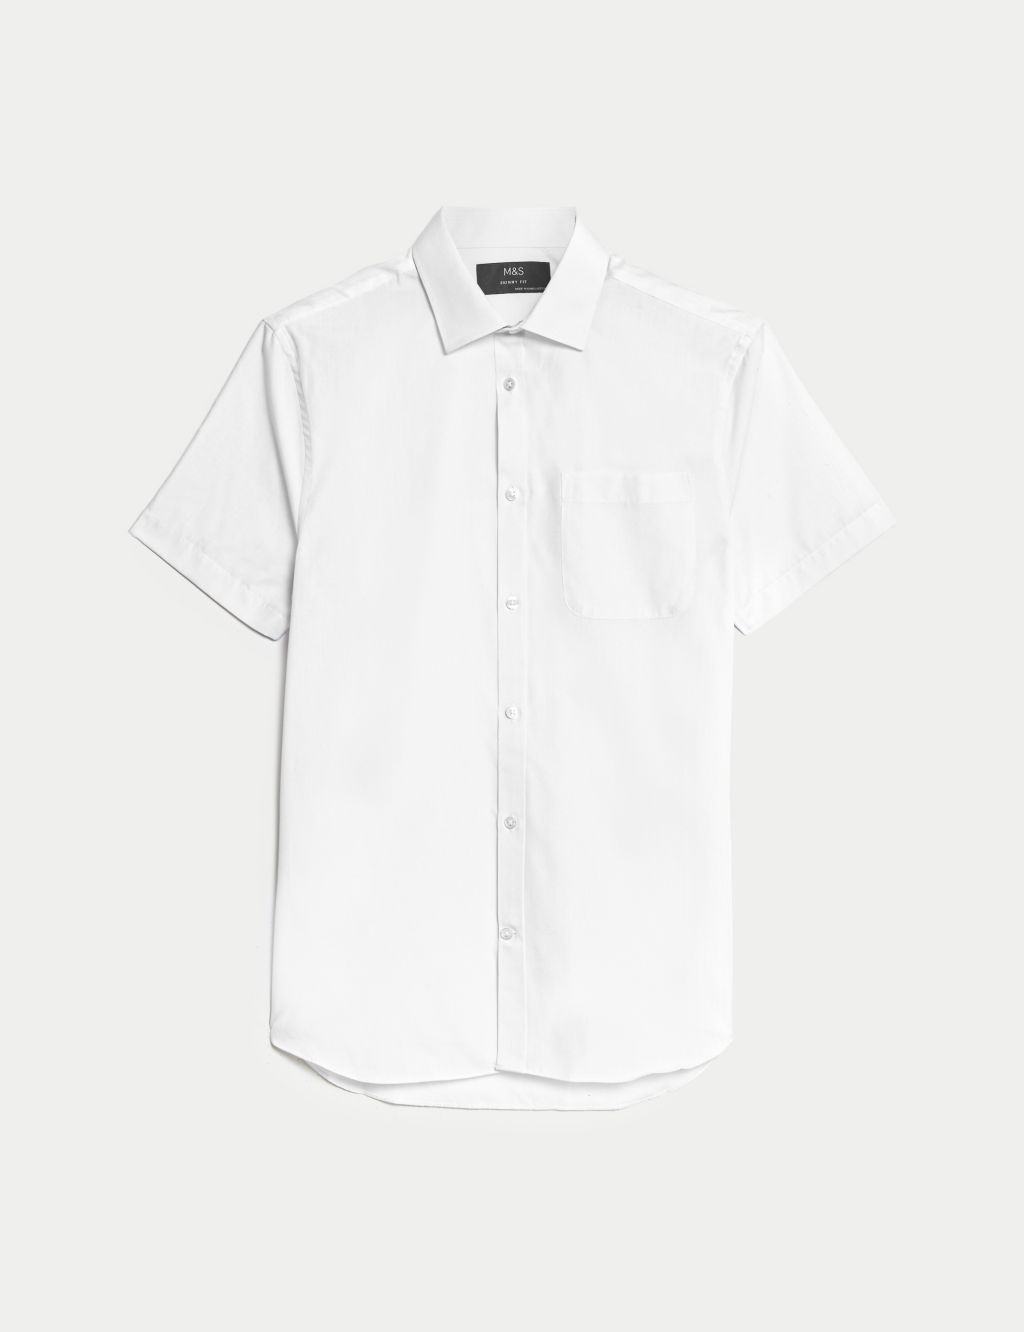 Skinny Fit Easy Iron Cotton Blend Shirt image 1